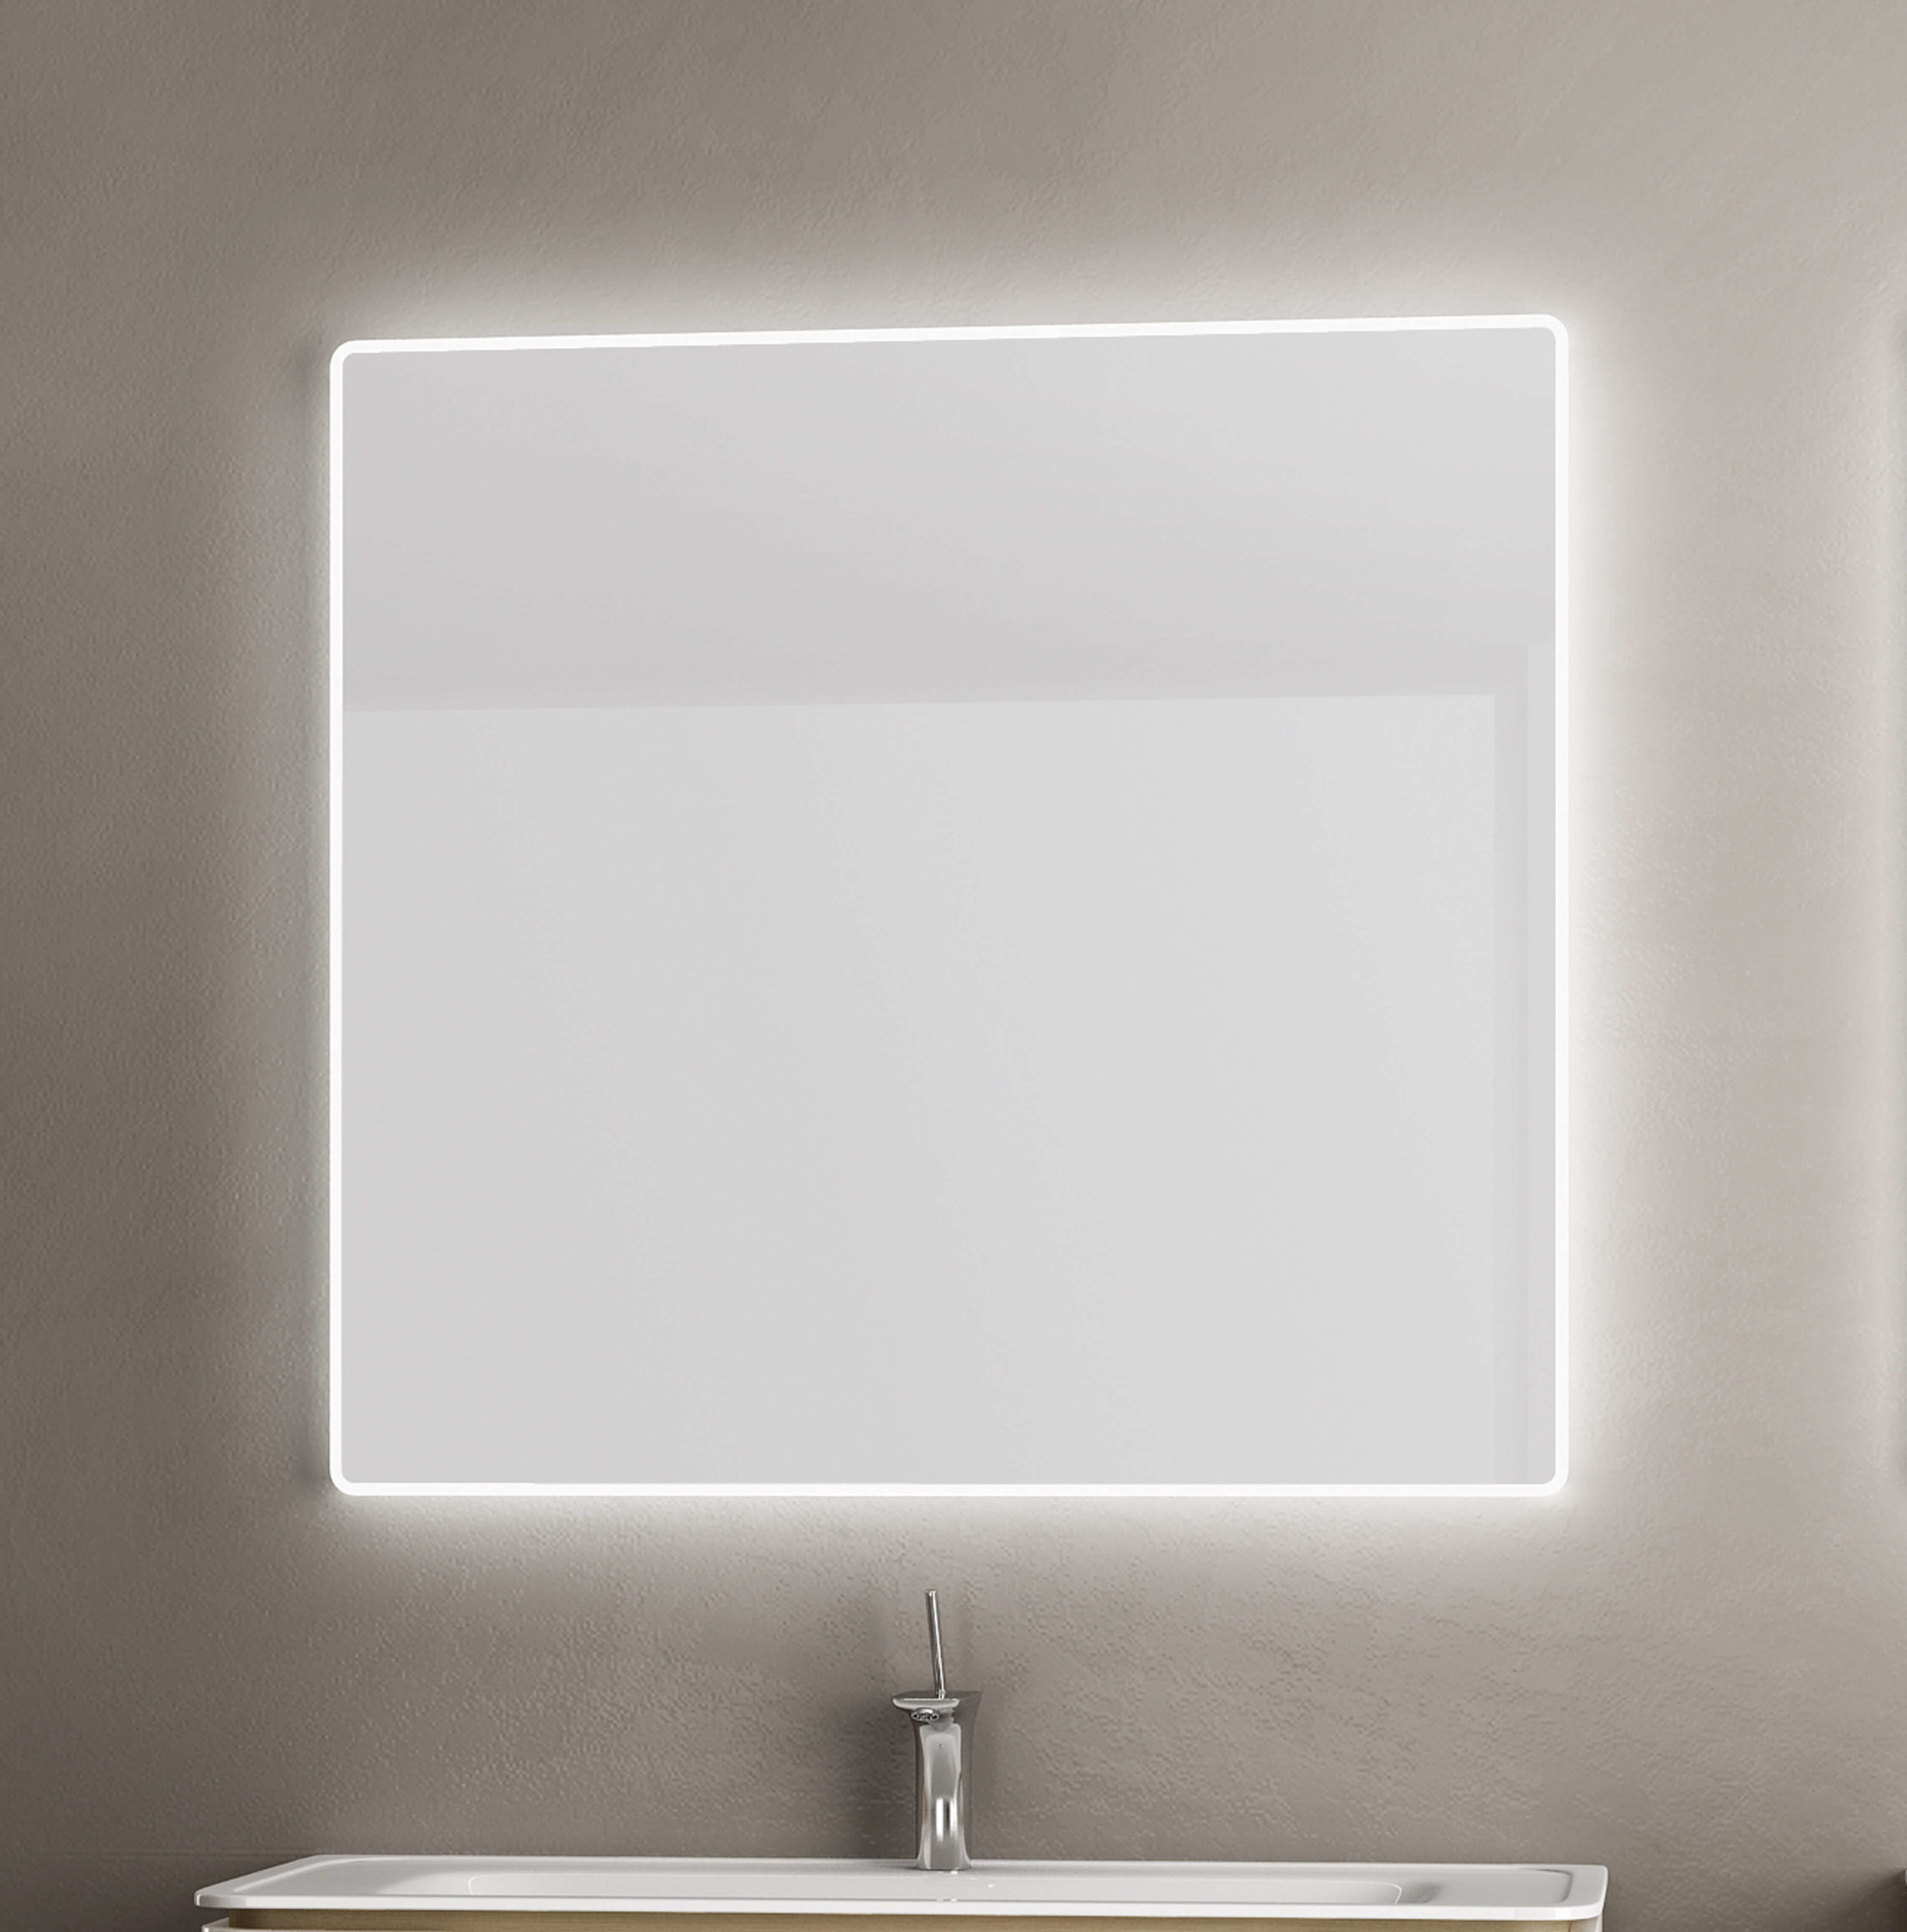 Strato mirror with frosted glass edge.